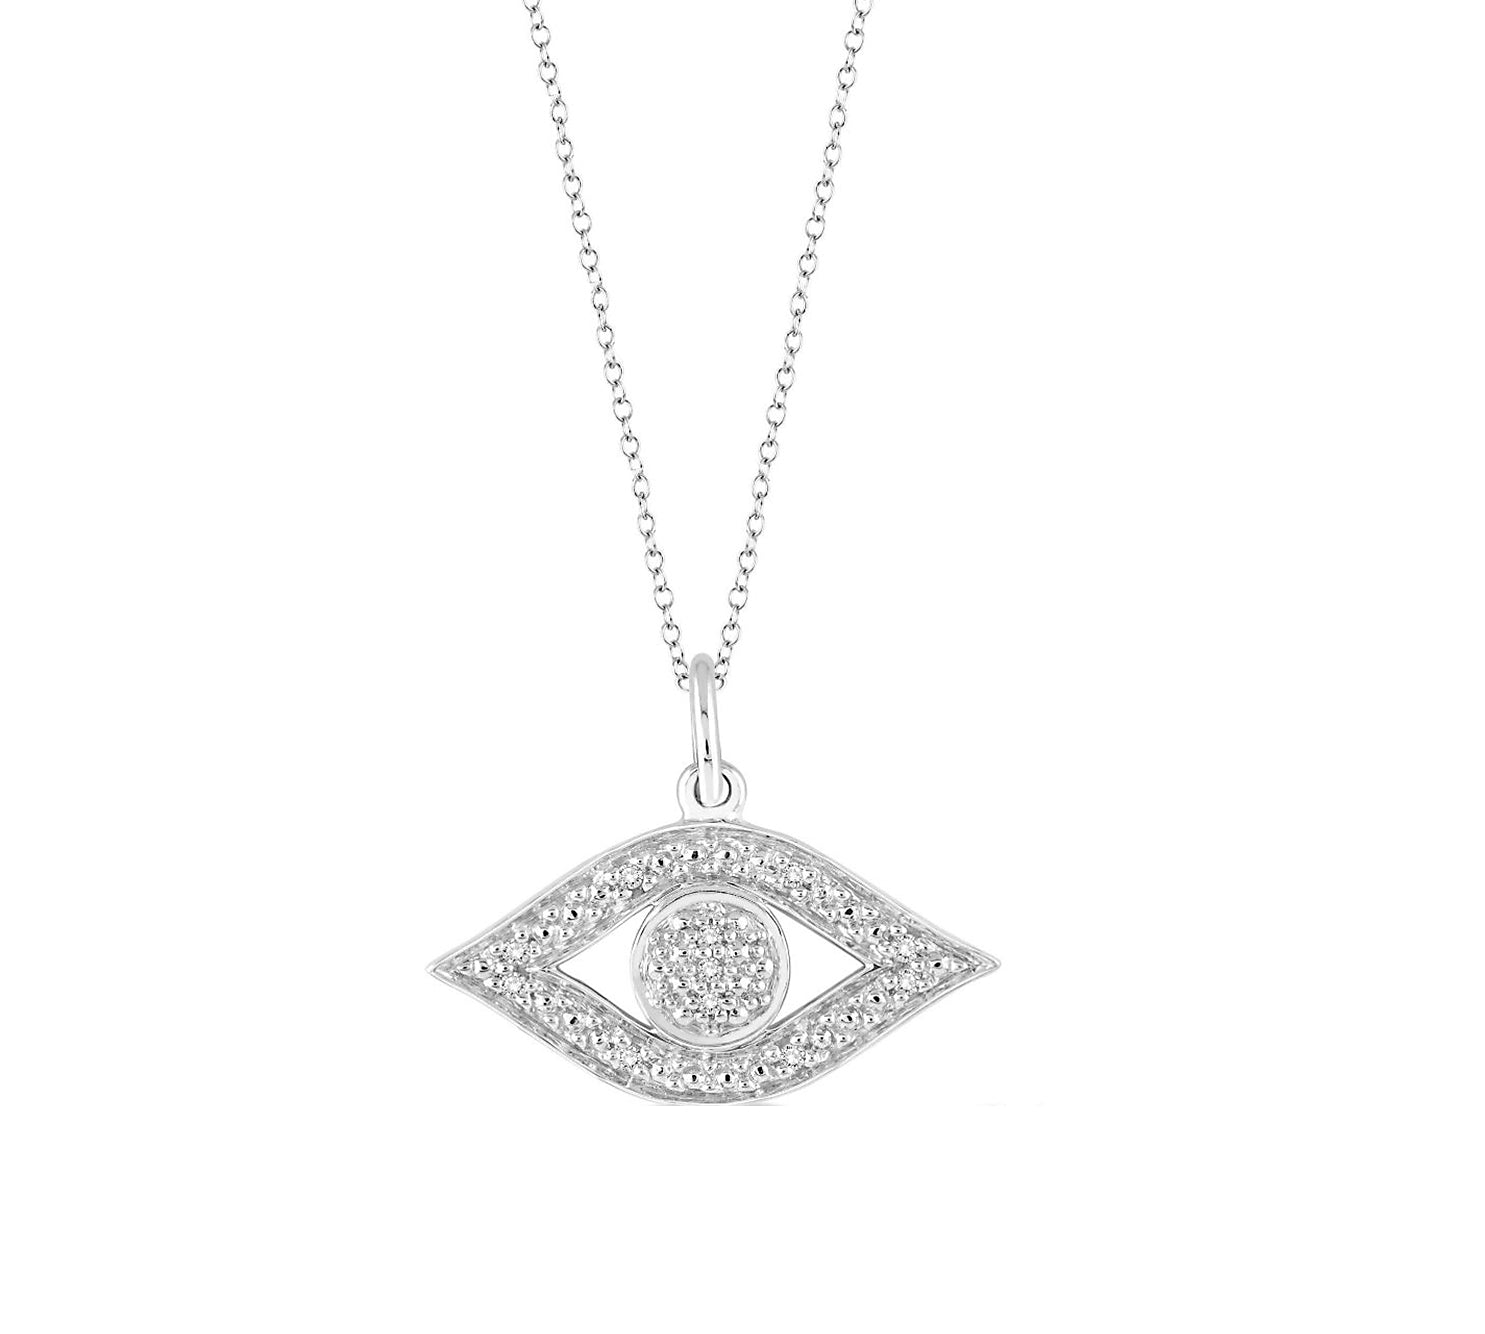 Evil Eye Pendant With Diamonds In Sterling Silver